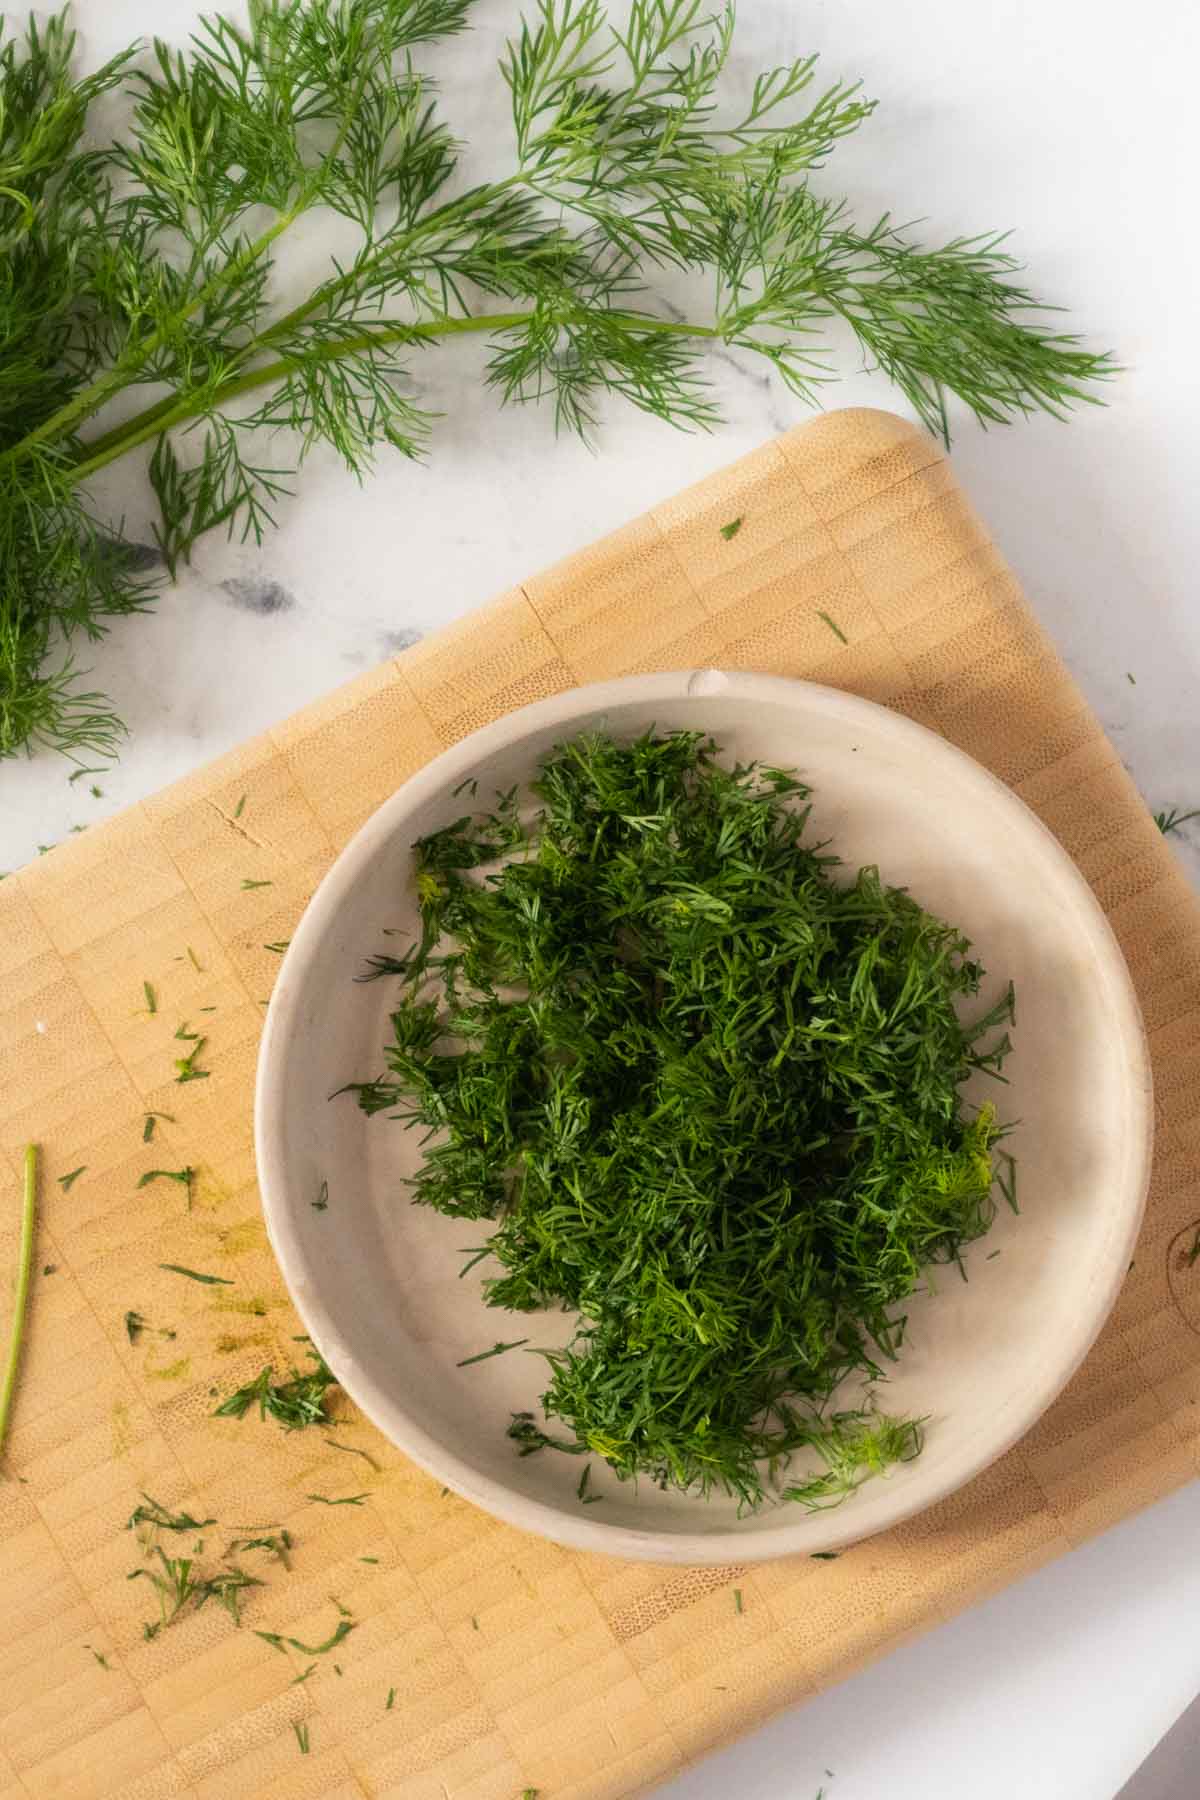 Chopped dill in a bowl.